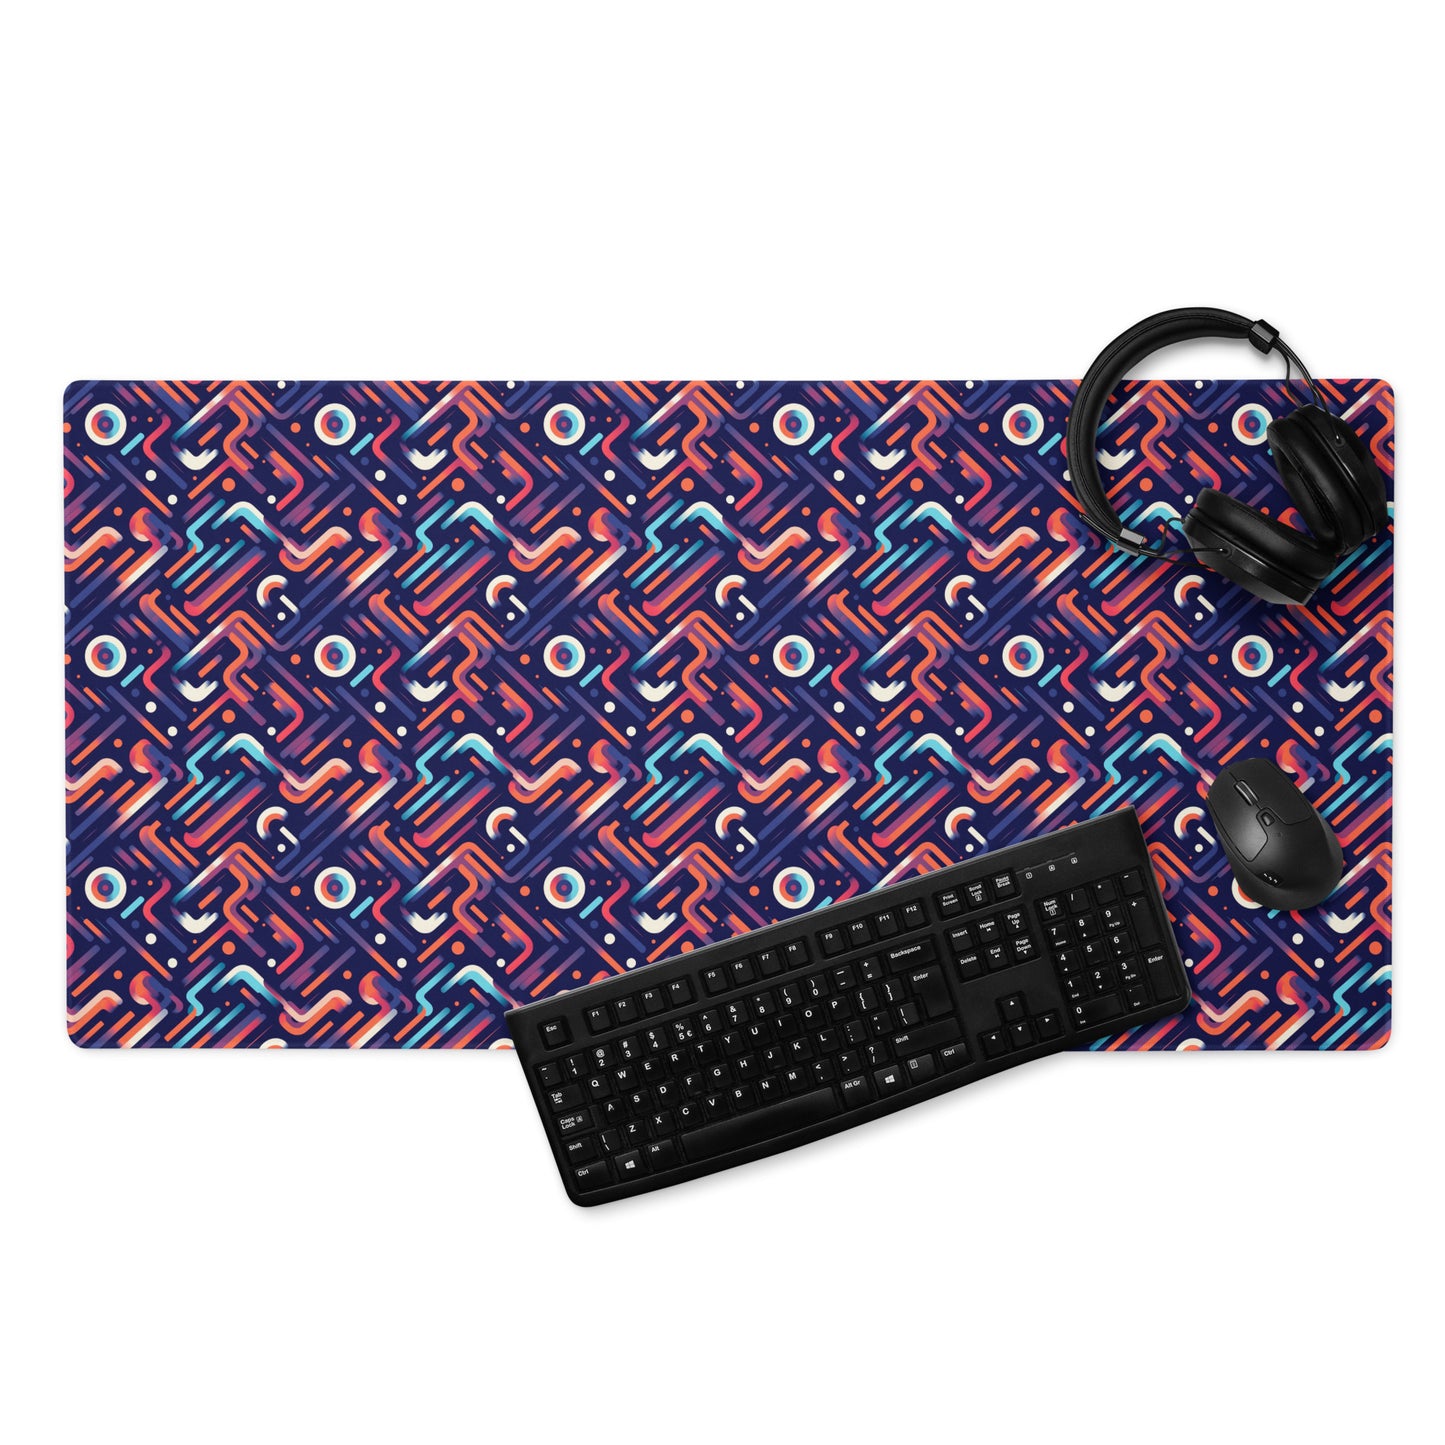 A 36" x 18" gaming desk pad with blue, orange, and purple lines on a dark blue background. A keyboard, mouse, and headphones sit on it.